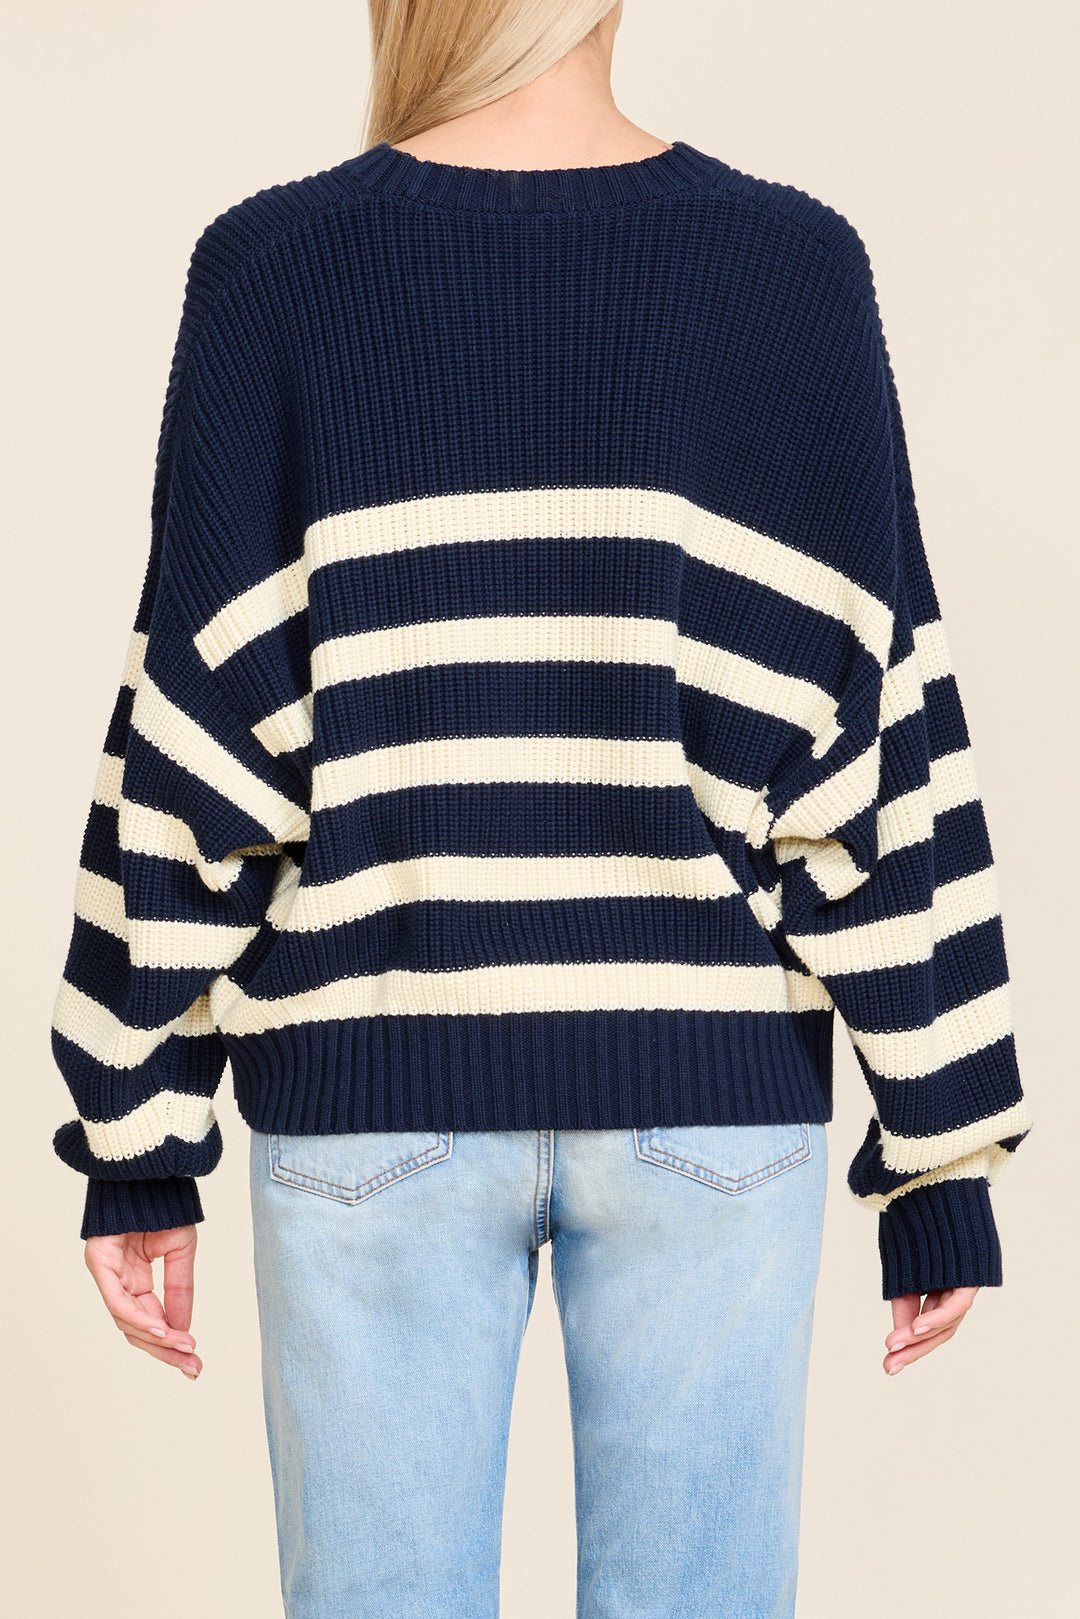 Oversized Cropped Striped Sailor Sweater